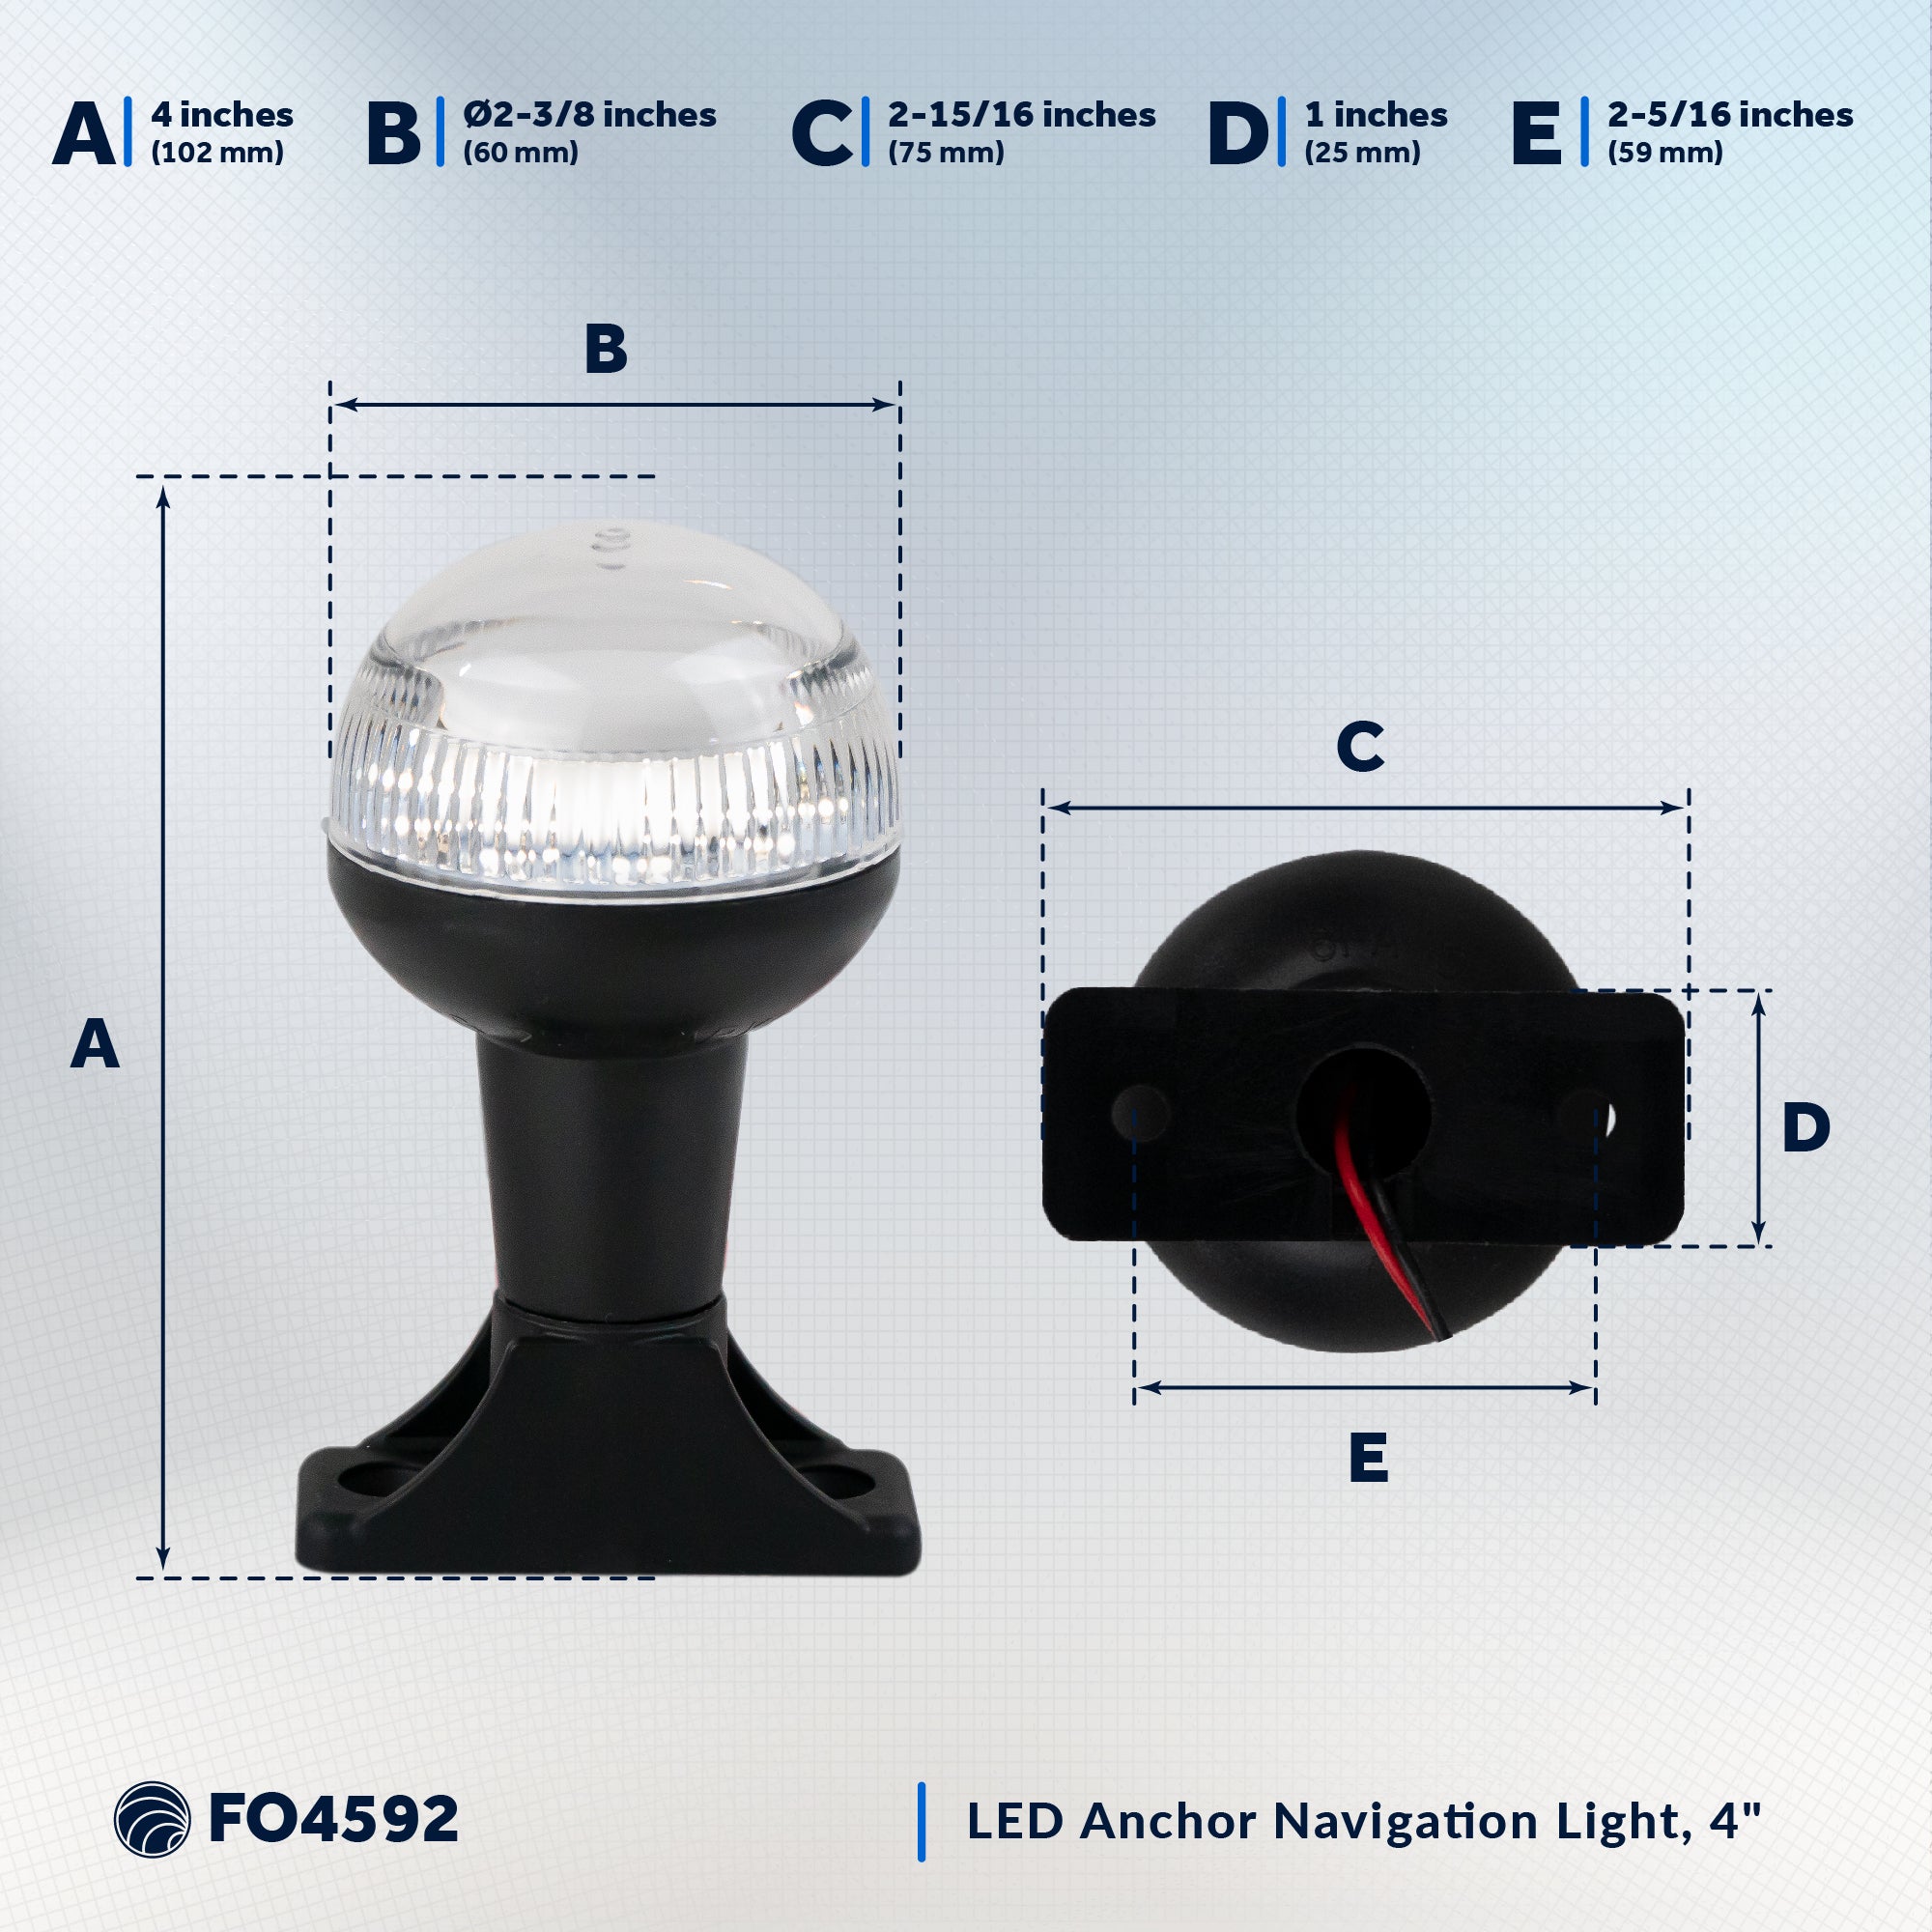 LED Anchor Navigation Light, 4" Fixed Mount, 2NM - FO4592